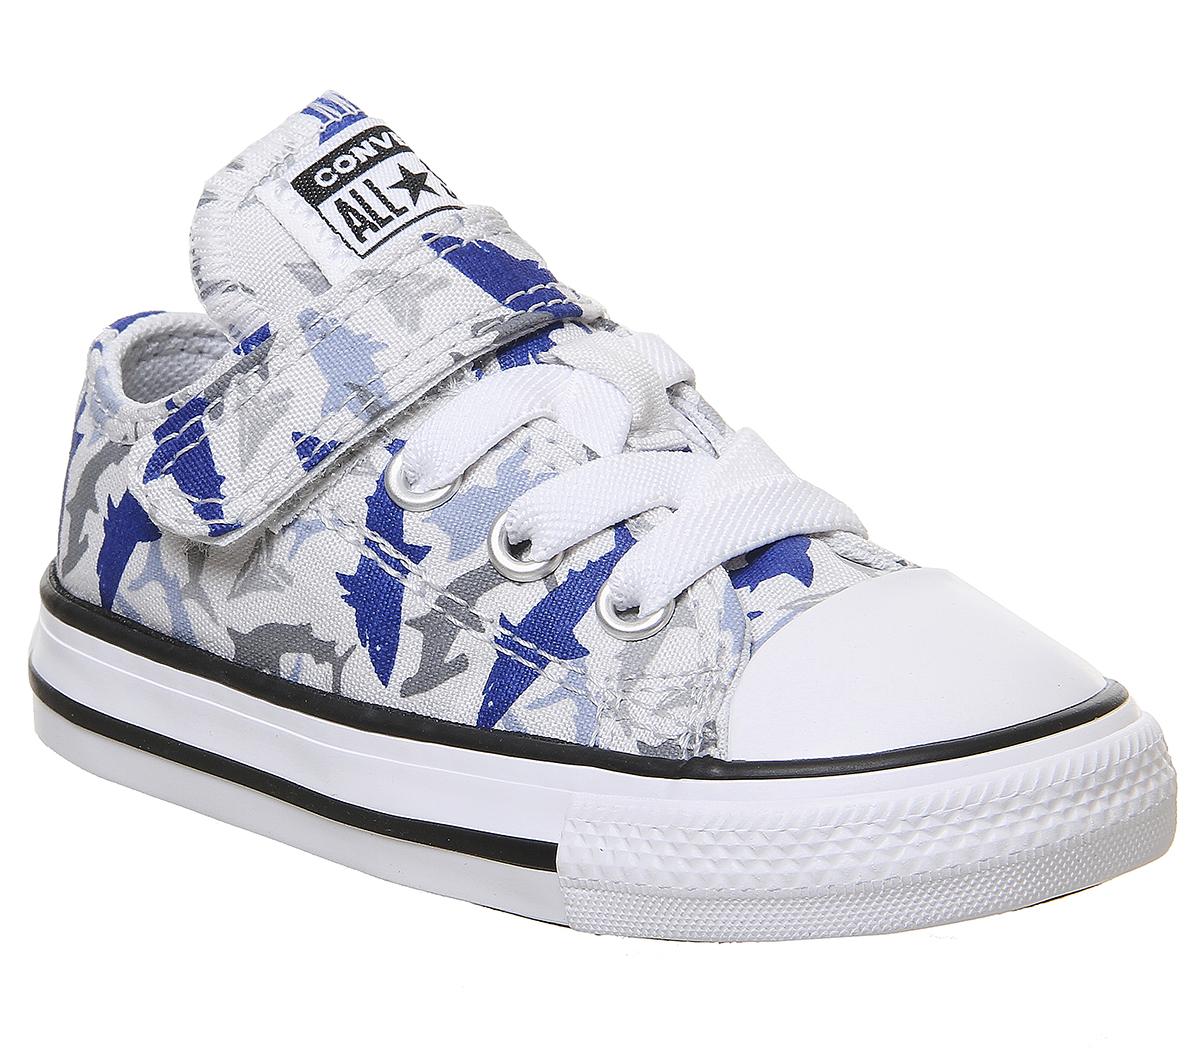 ConverseAll Star Low 1vlace TrainersPhoton Dust Rush Blue White Shark